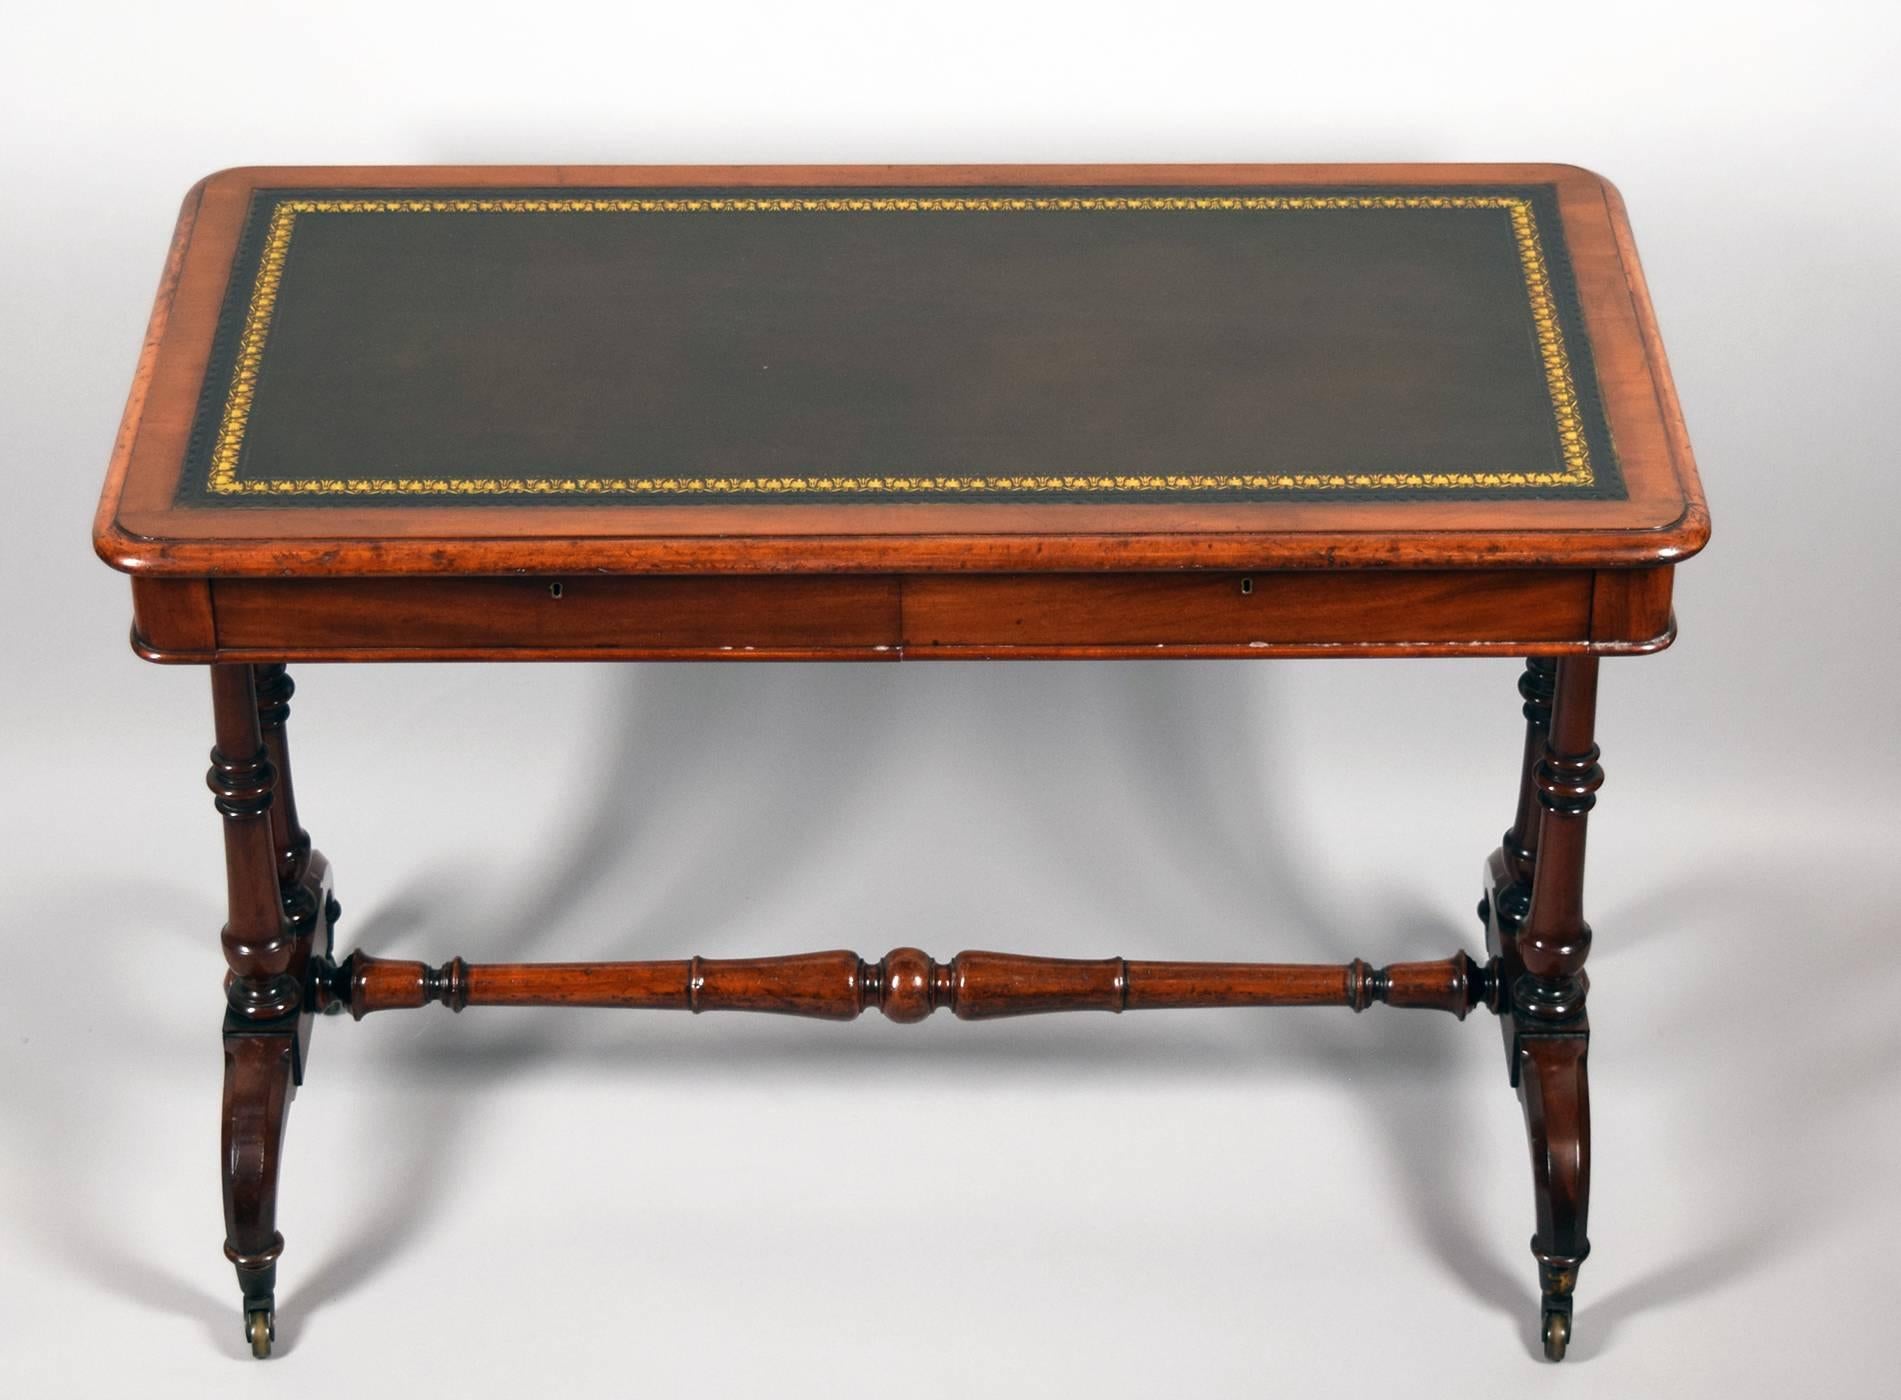 Elegant carved and turned trestle writing table with two drawers supported by two turned slender pillars on each side over an arched two footed base with brass casters.

Provenance: Roundwood Manor, Hunting Valley, Ohio.